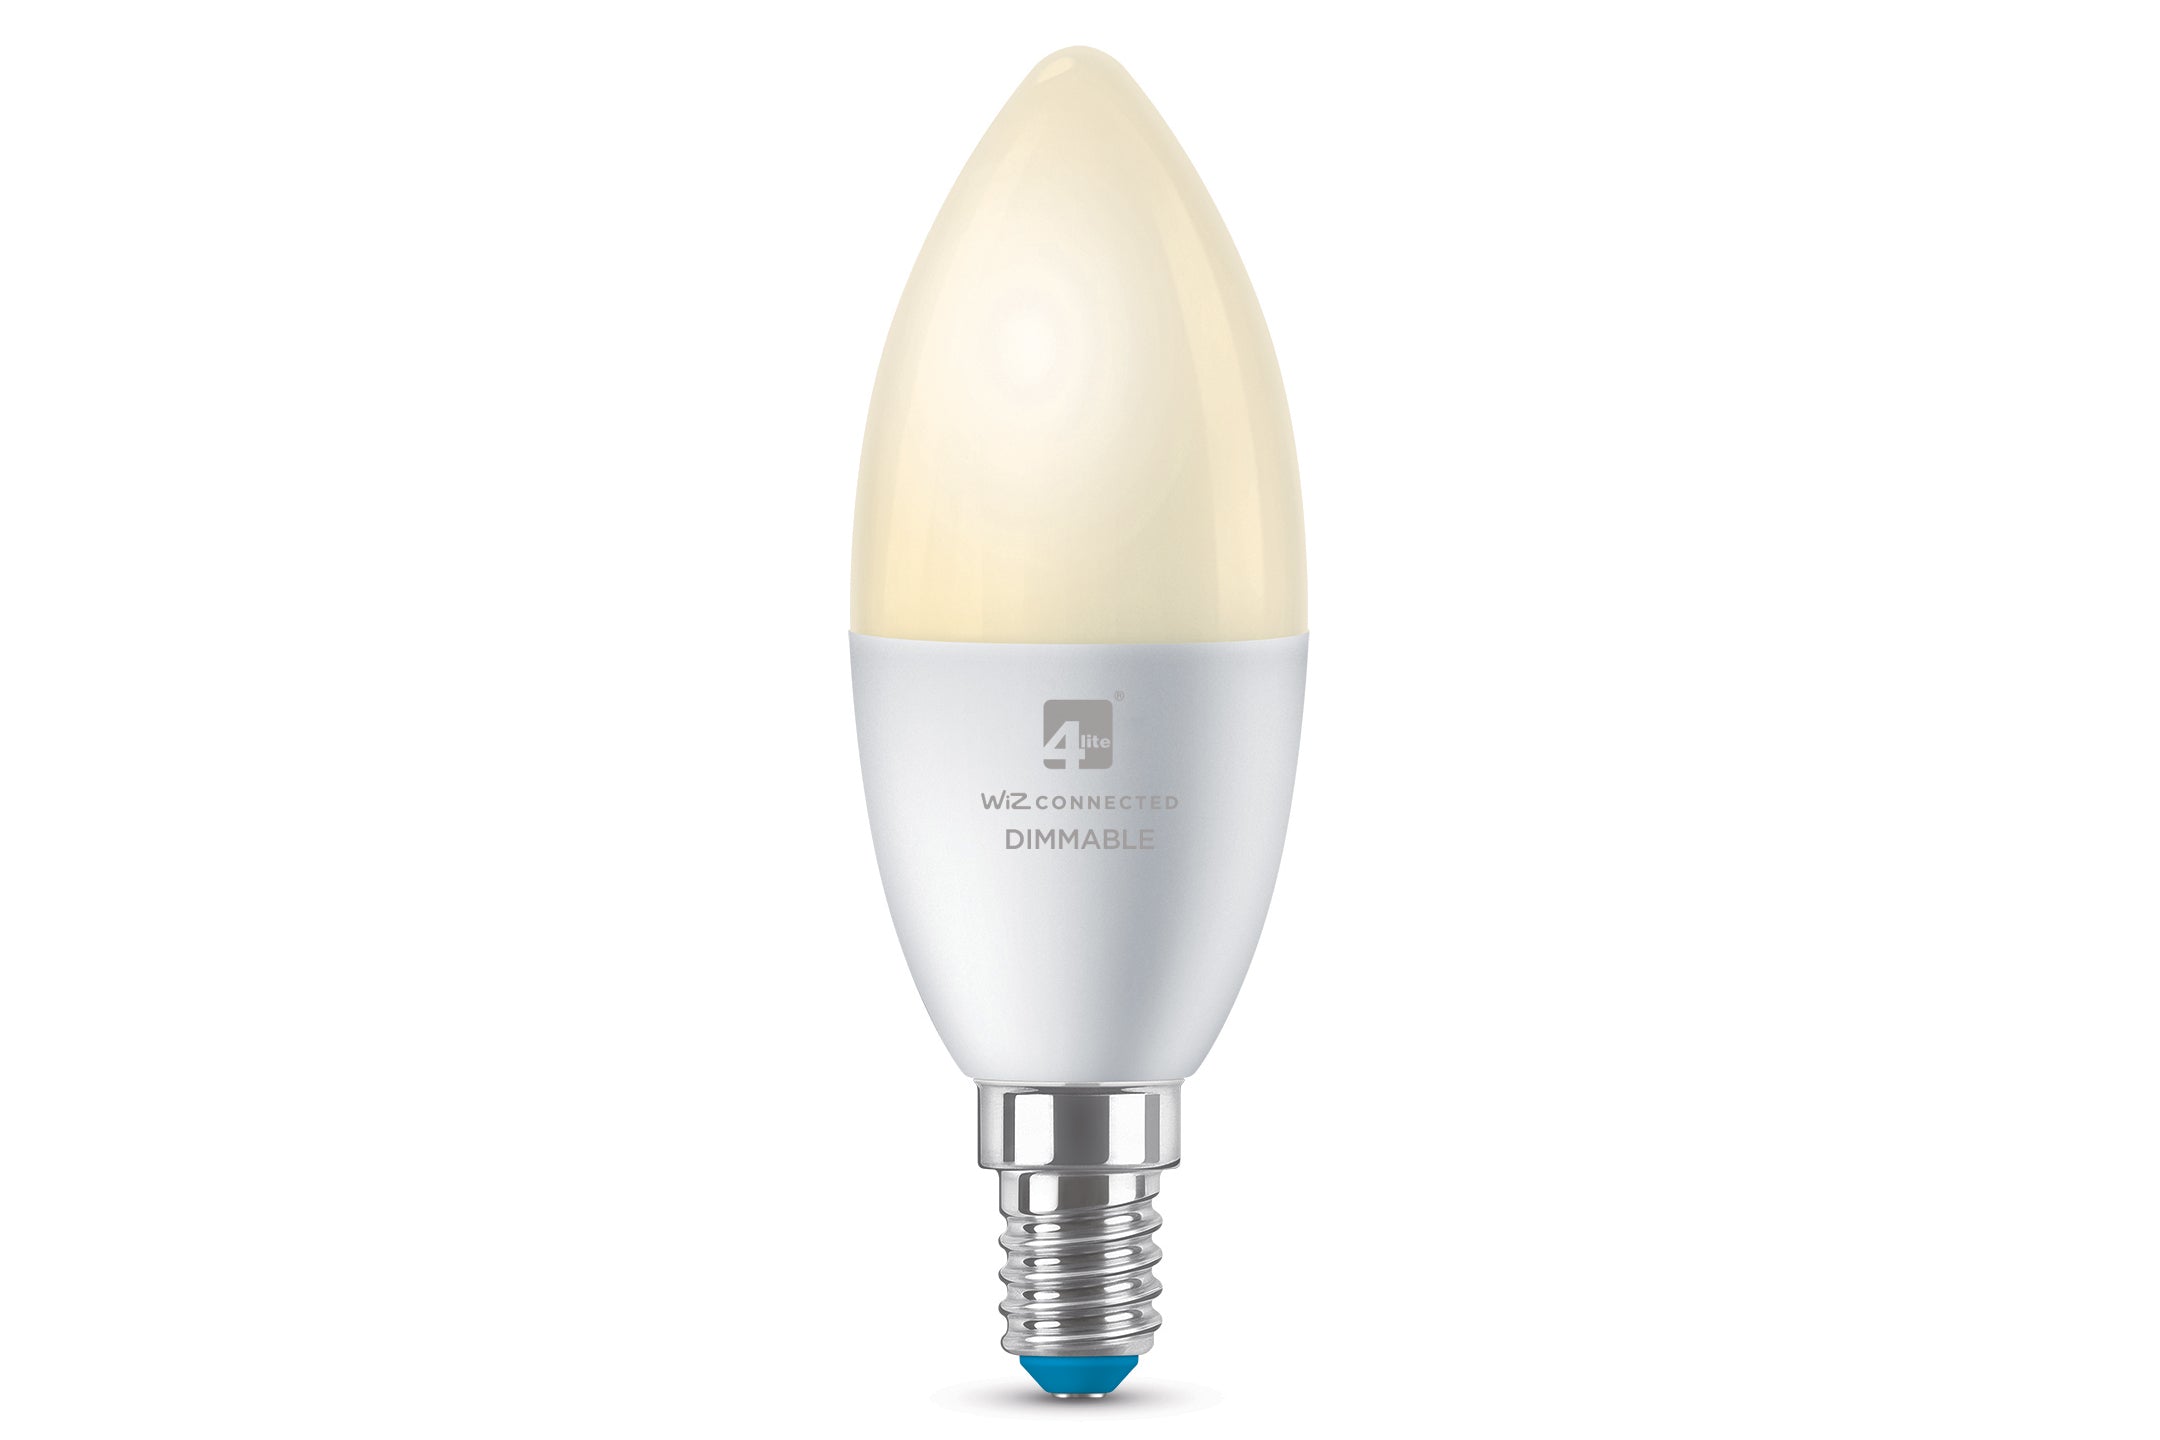 4lite WiZ Connected C37 Candle Dimmable Warm White WiFi LED Smart Bulb - E14 Small Screw (Single)